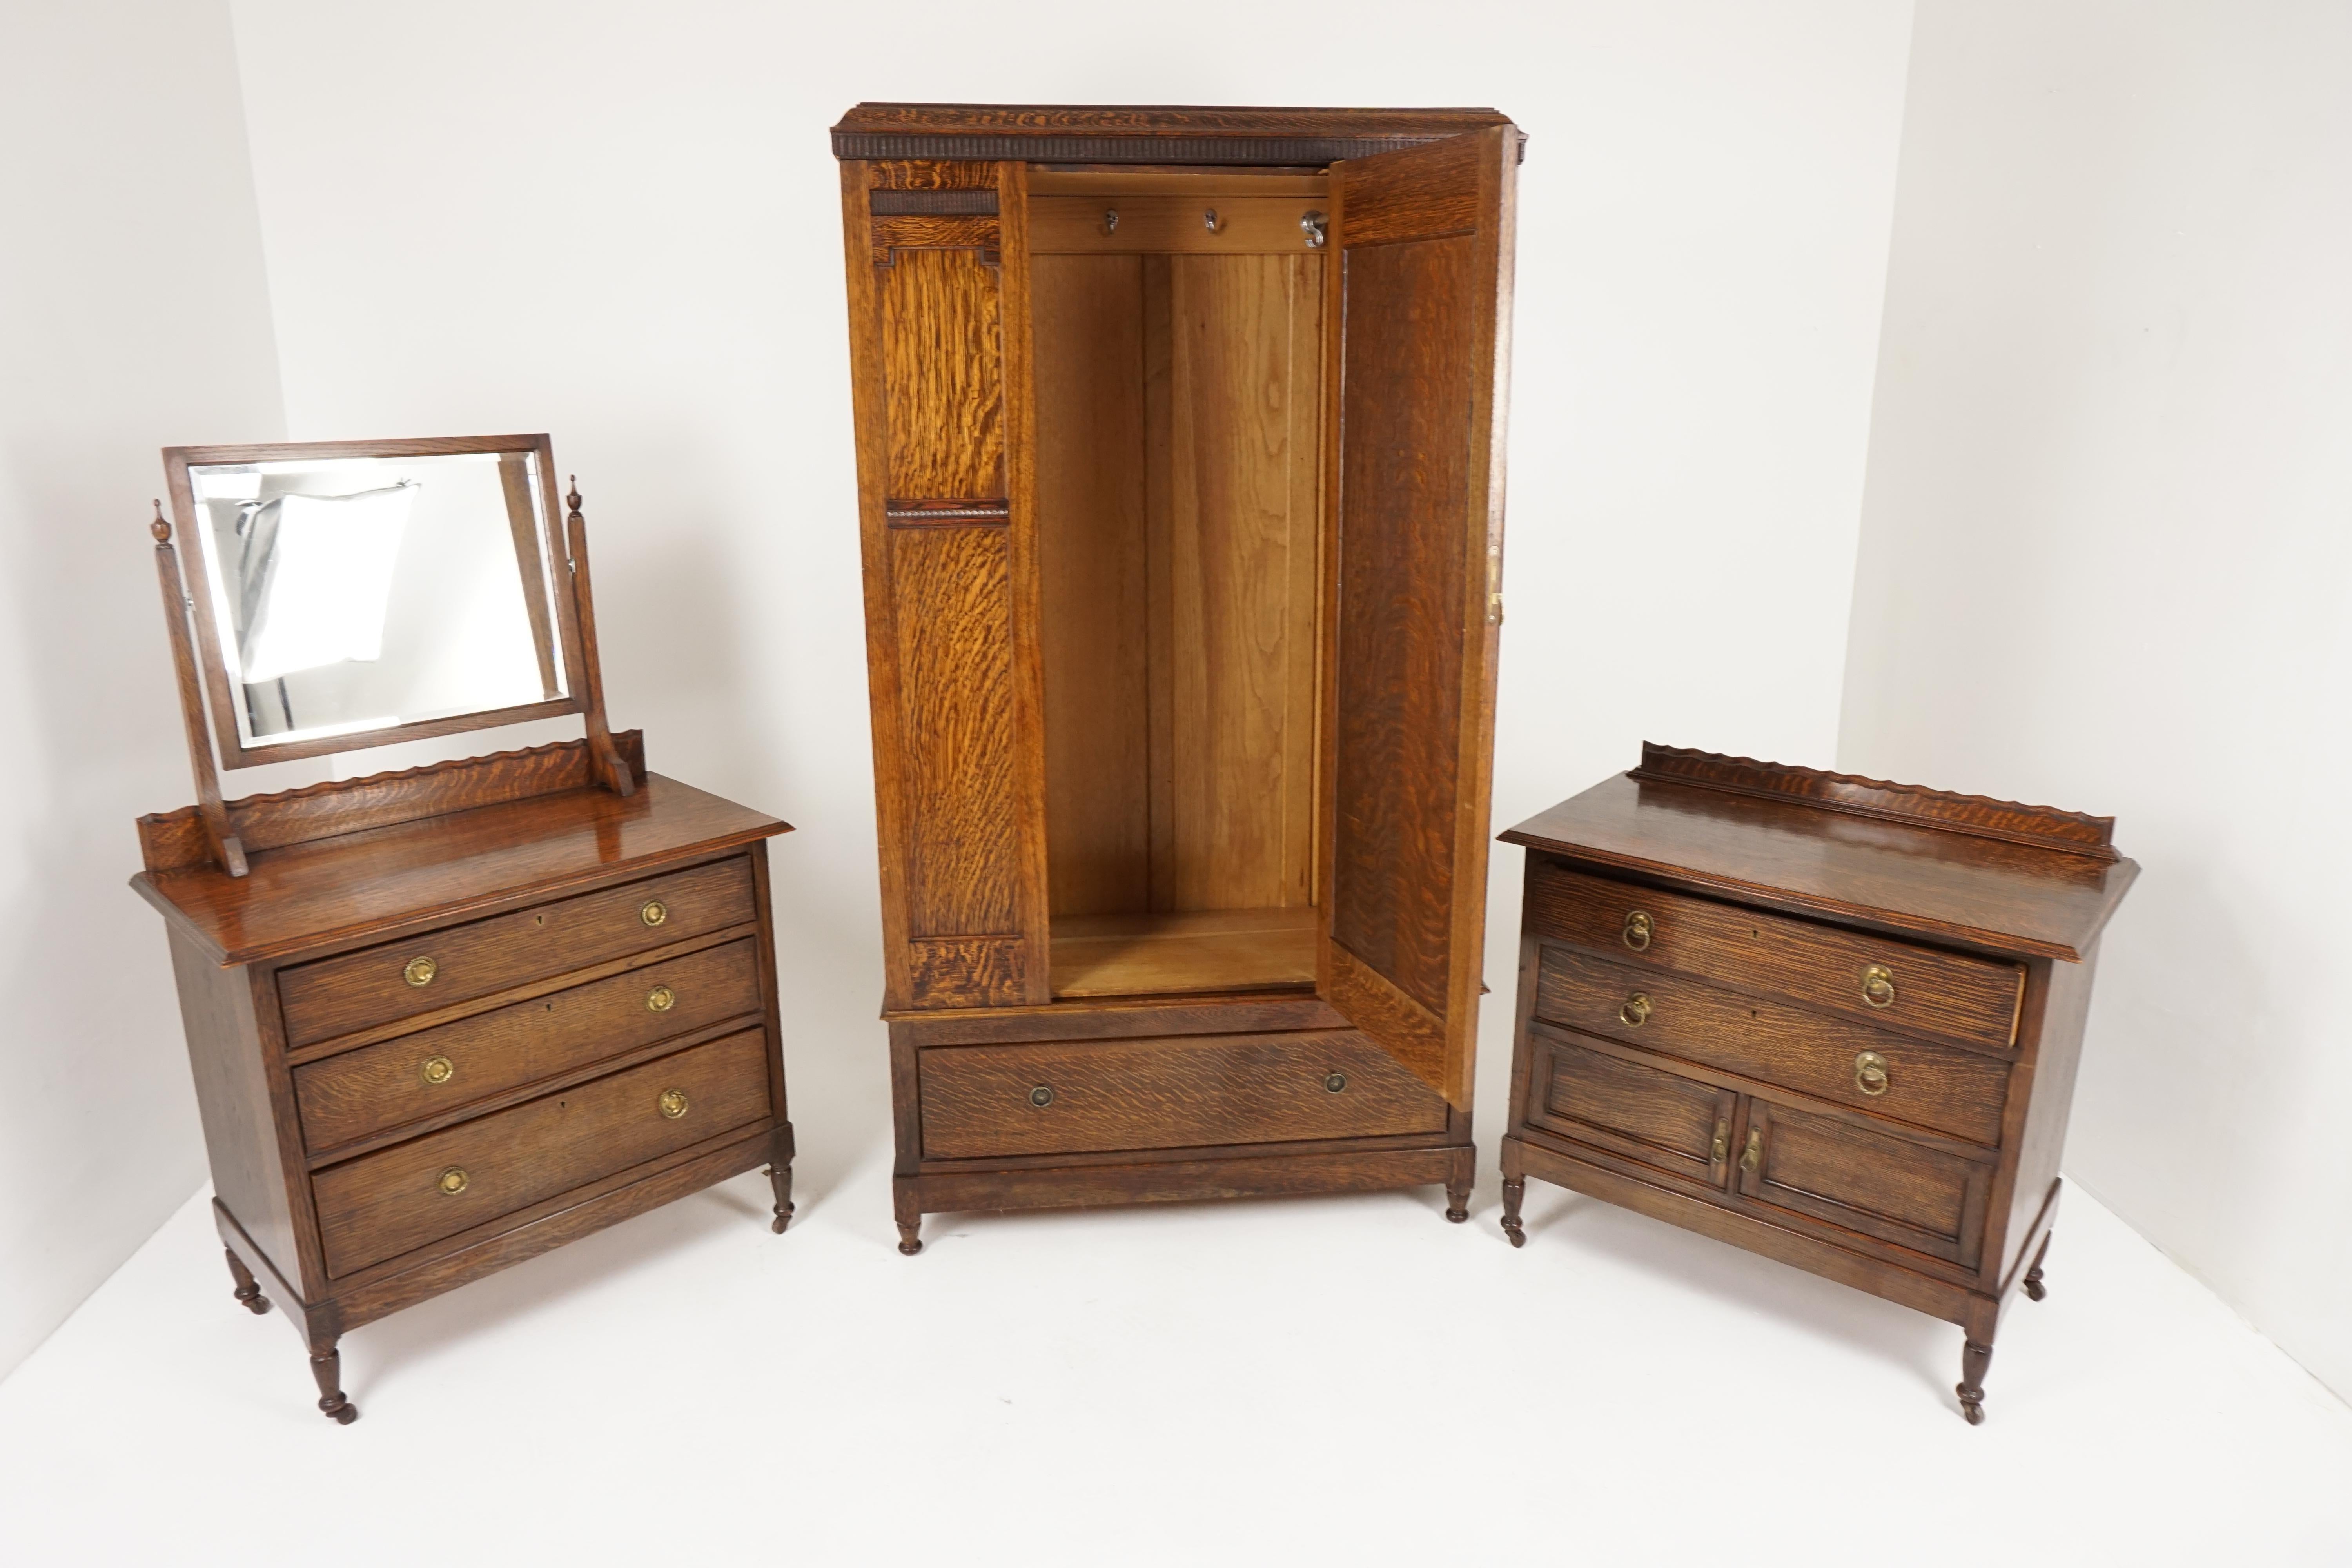 Antique tiger oak 3-piece bedroom suite armoire vanity dresser Scotland 1910, B2184

Scotland 1910
Solid tiger oak
Original finish
Armoire with carved cornice on top
Single beveled glass mirror door opens to reveal pair of hanging